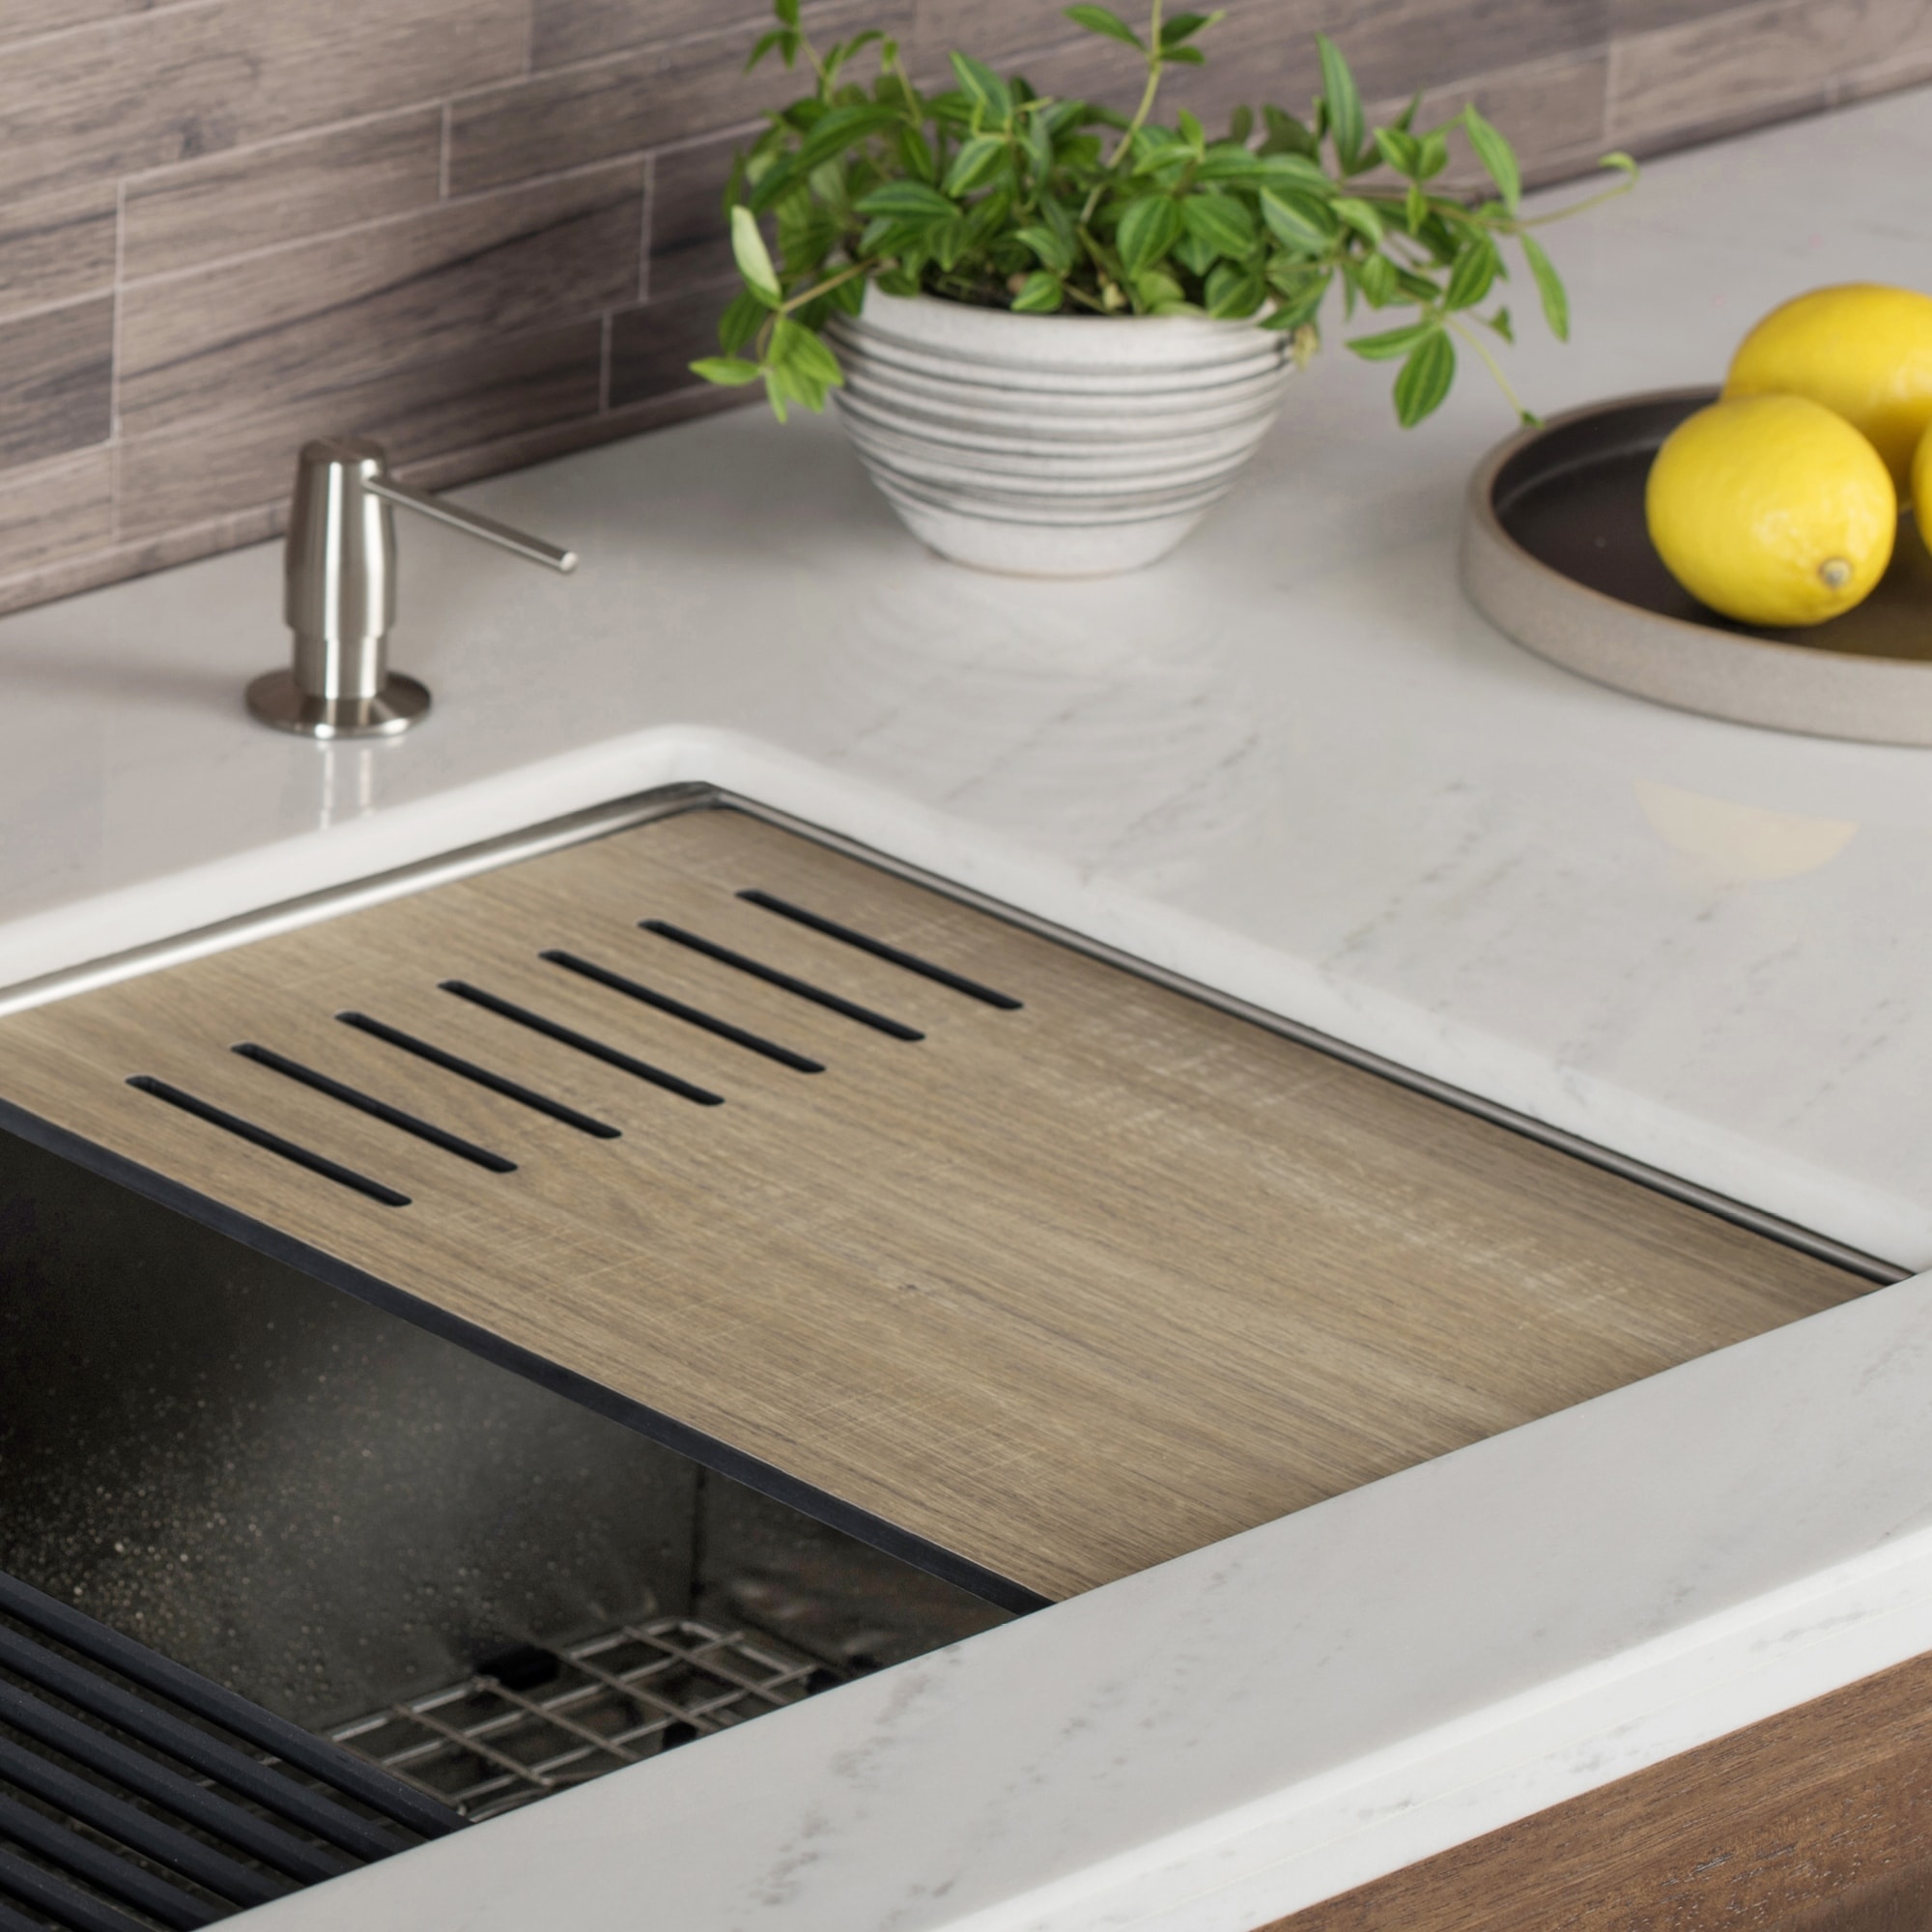 https://ak1.ostkcdn.com/images/products/is/images/direct/a5f0d3aec49427694c8b6bee02e6dfa3bd5d3aba/KRAUS-Workstation-Kitchen-Sink-Wood-Grain-Composite-Cutting-Board.jpg